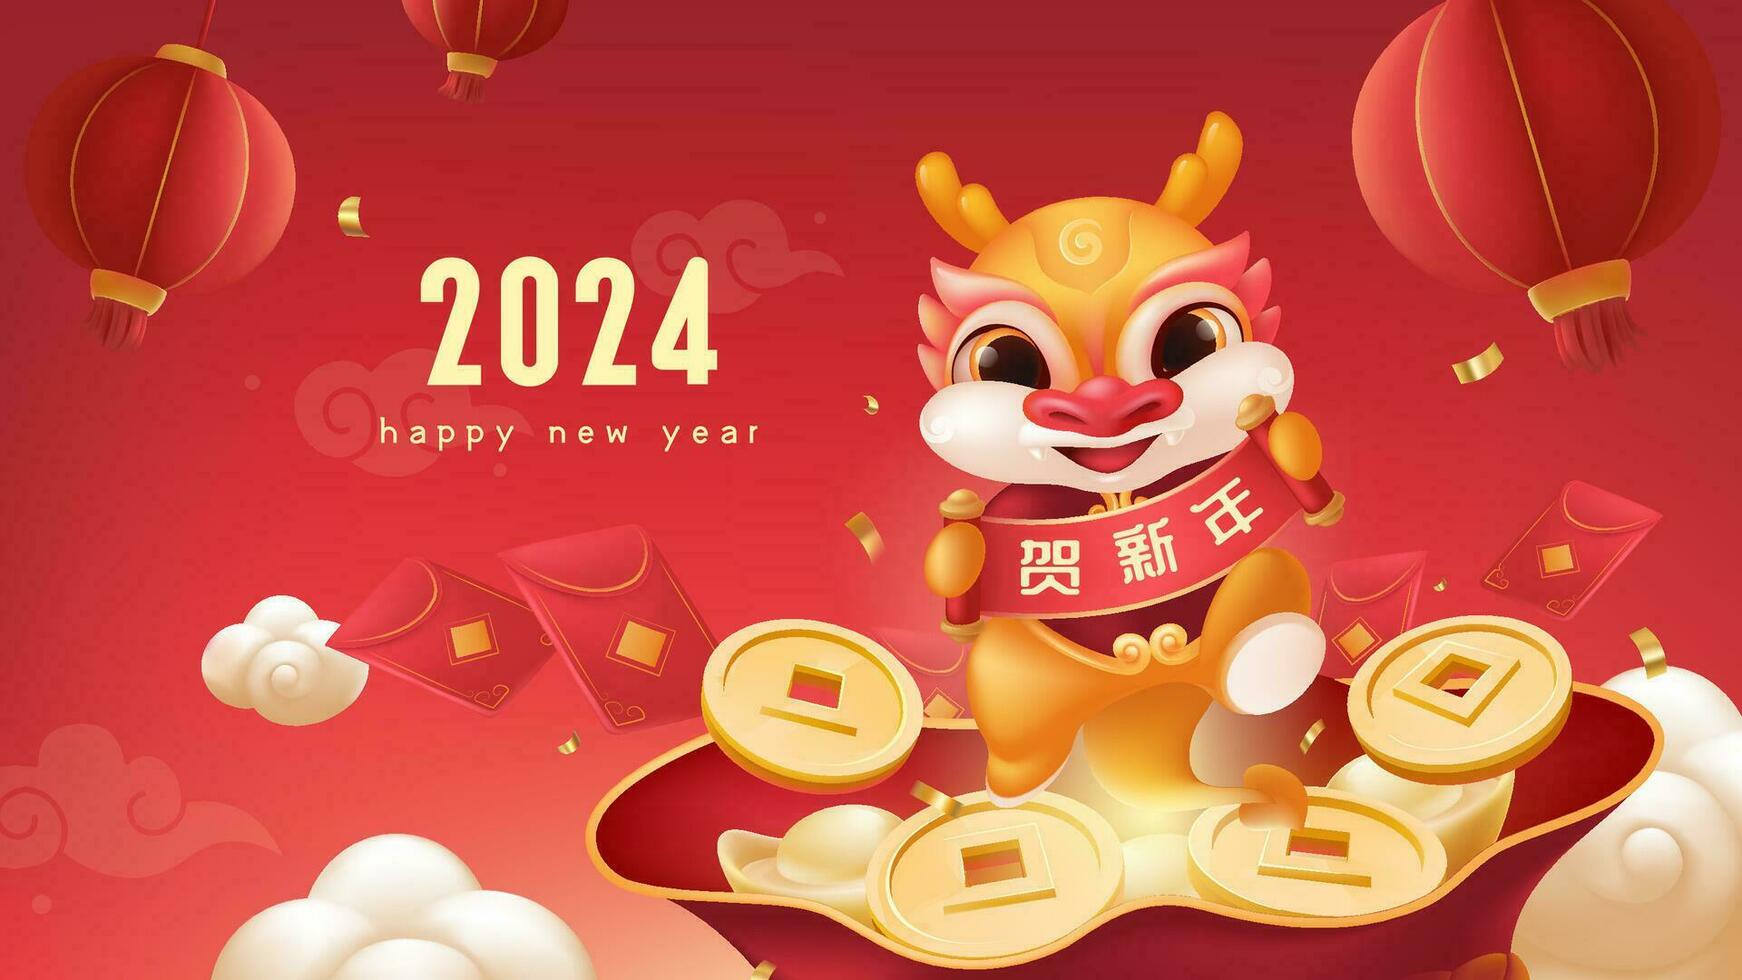 The Spring Festival background design is a cute dragon holding a New Year scroll vector